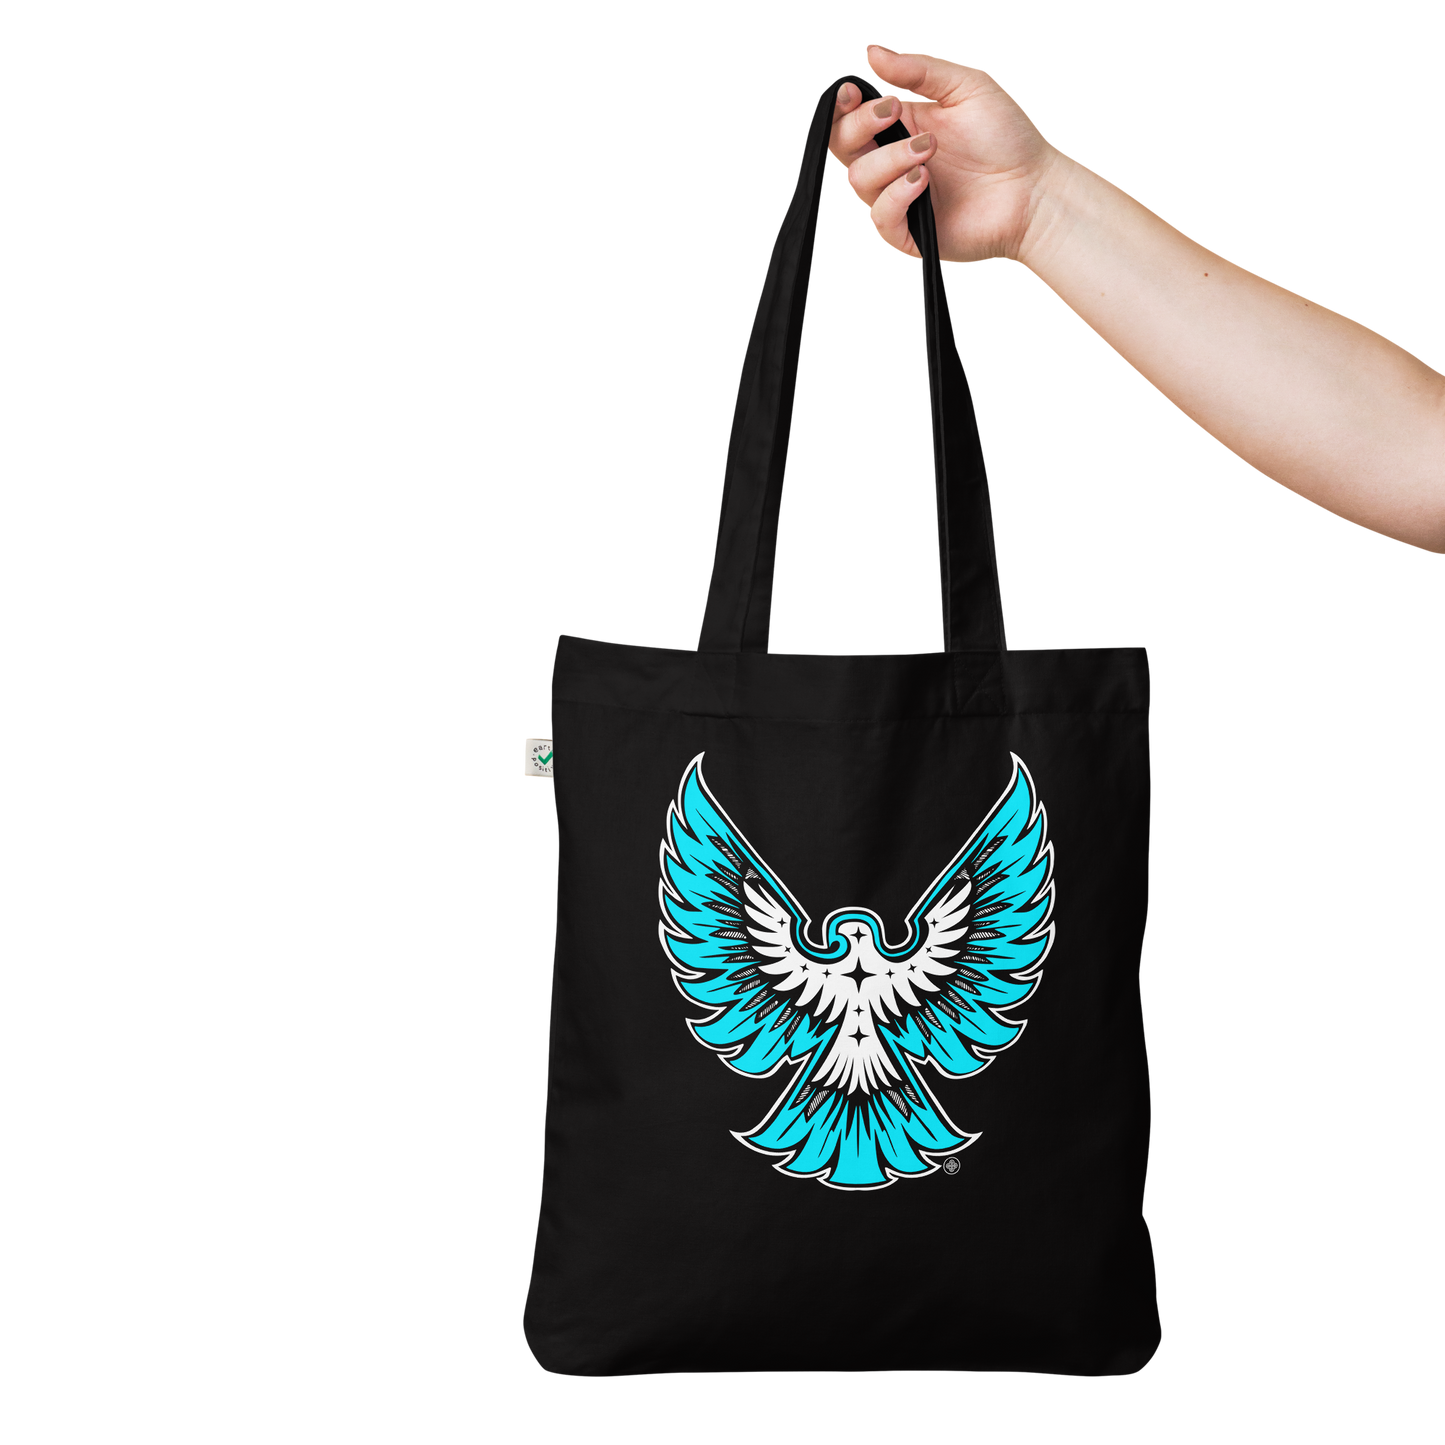 Trendy &amp; Organic Tote Bag ❯ Spread Your Wings ❯ Various Colors